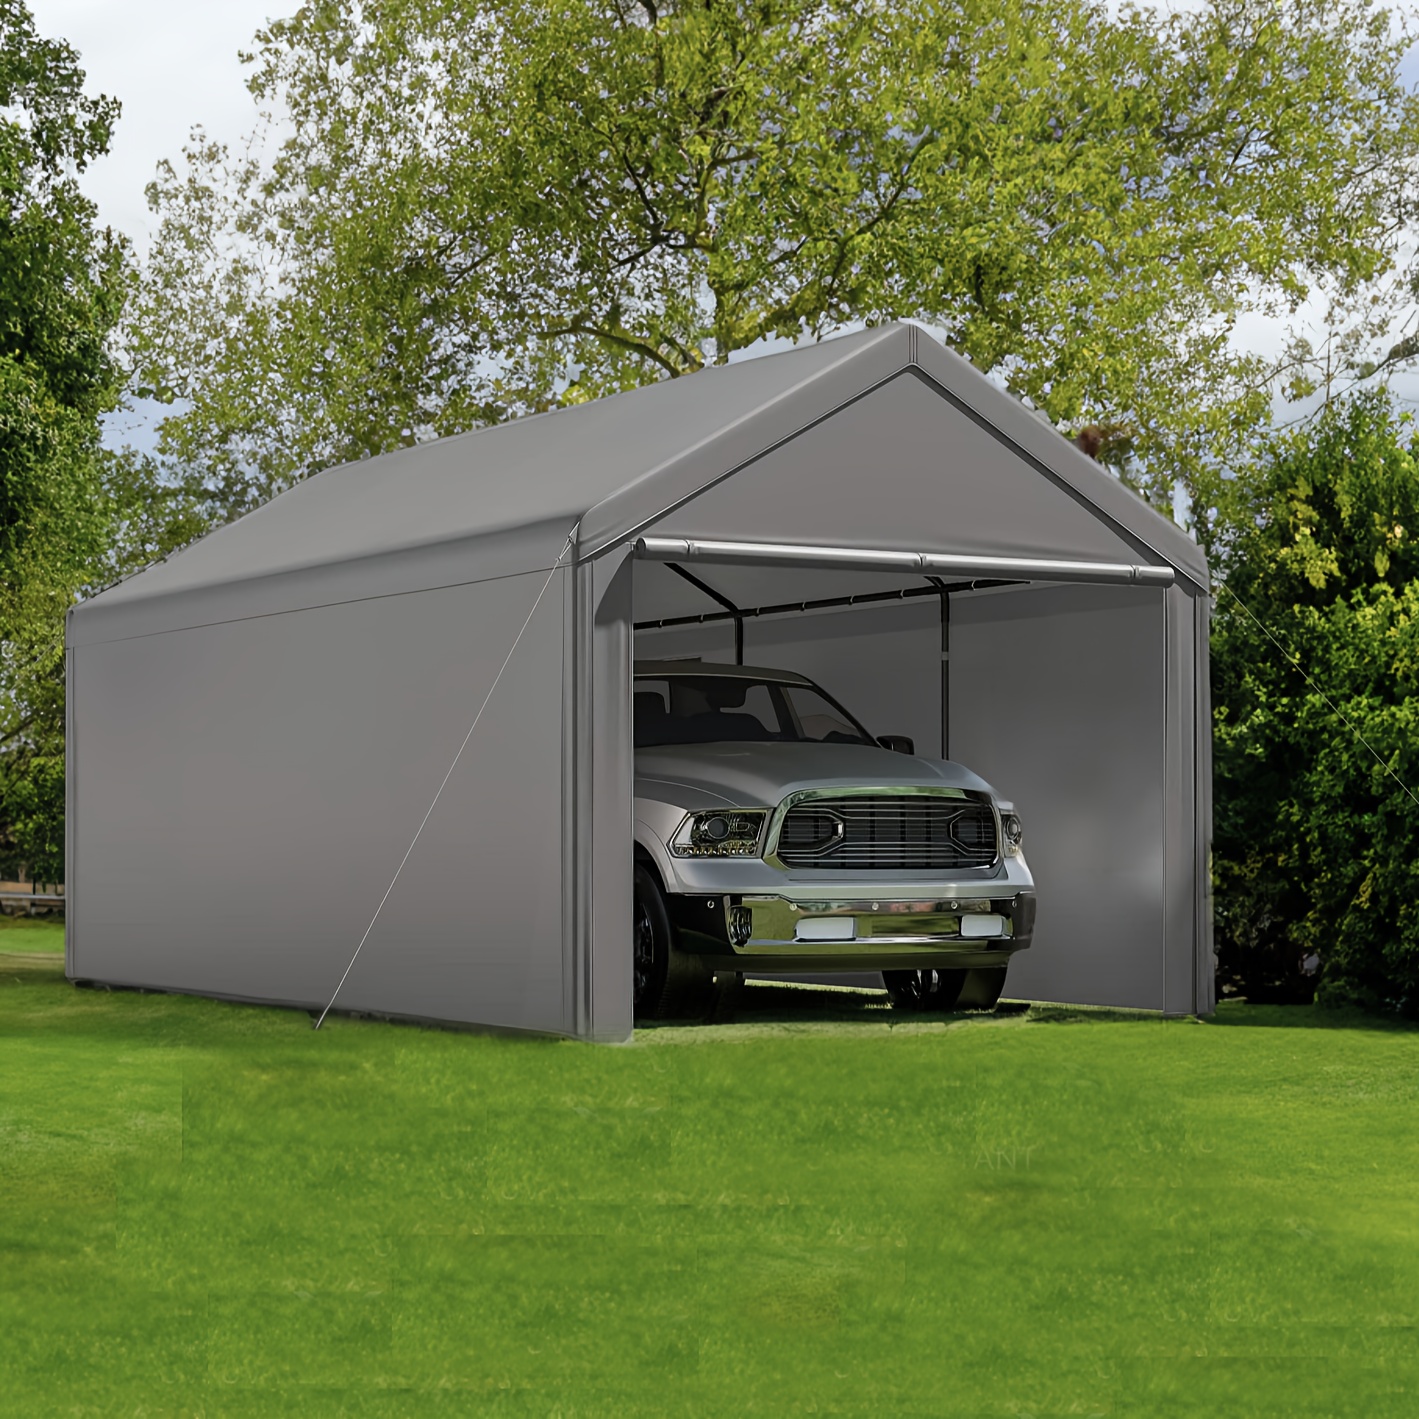 

Outdoor Carport 10x20ft Heavy Duty Canopy Storage Shed, Portable Garage Party Tent, Portable Garage With Removable Sidewalls & Doors All-season Tarp For Car, Truck, Party